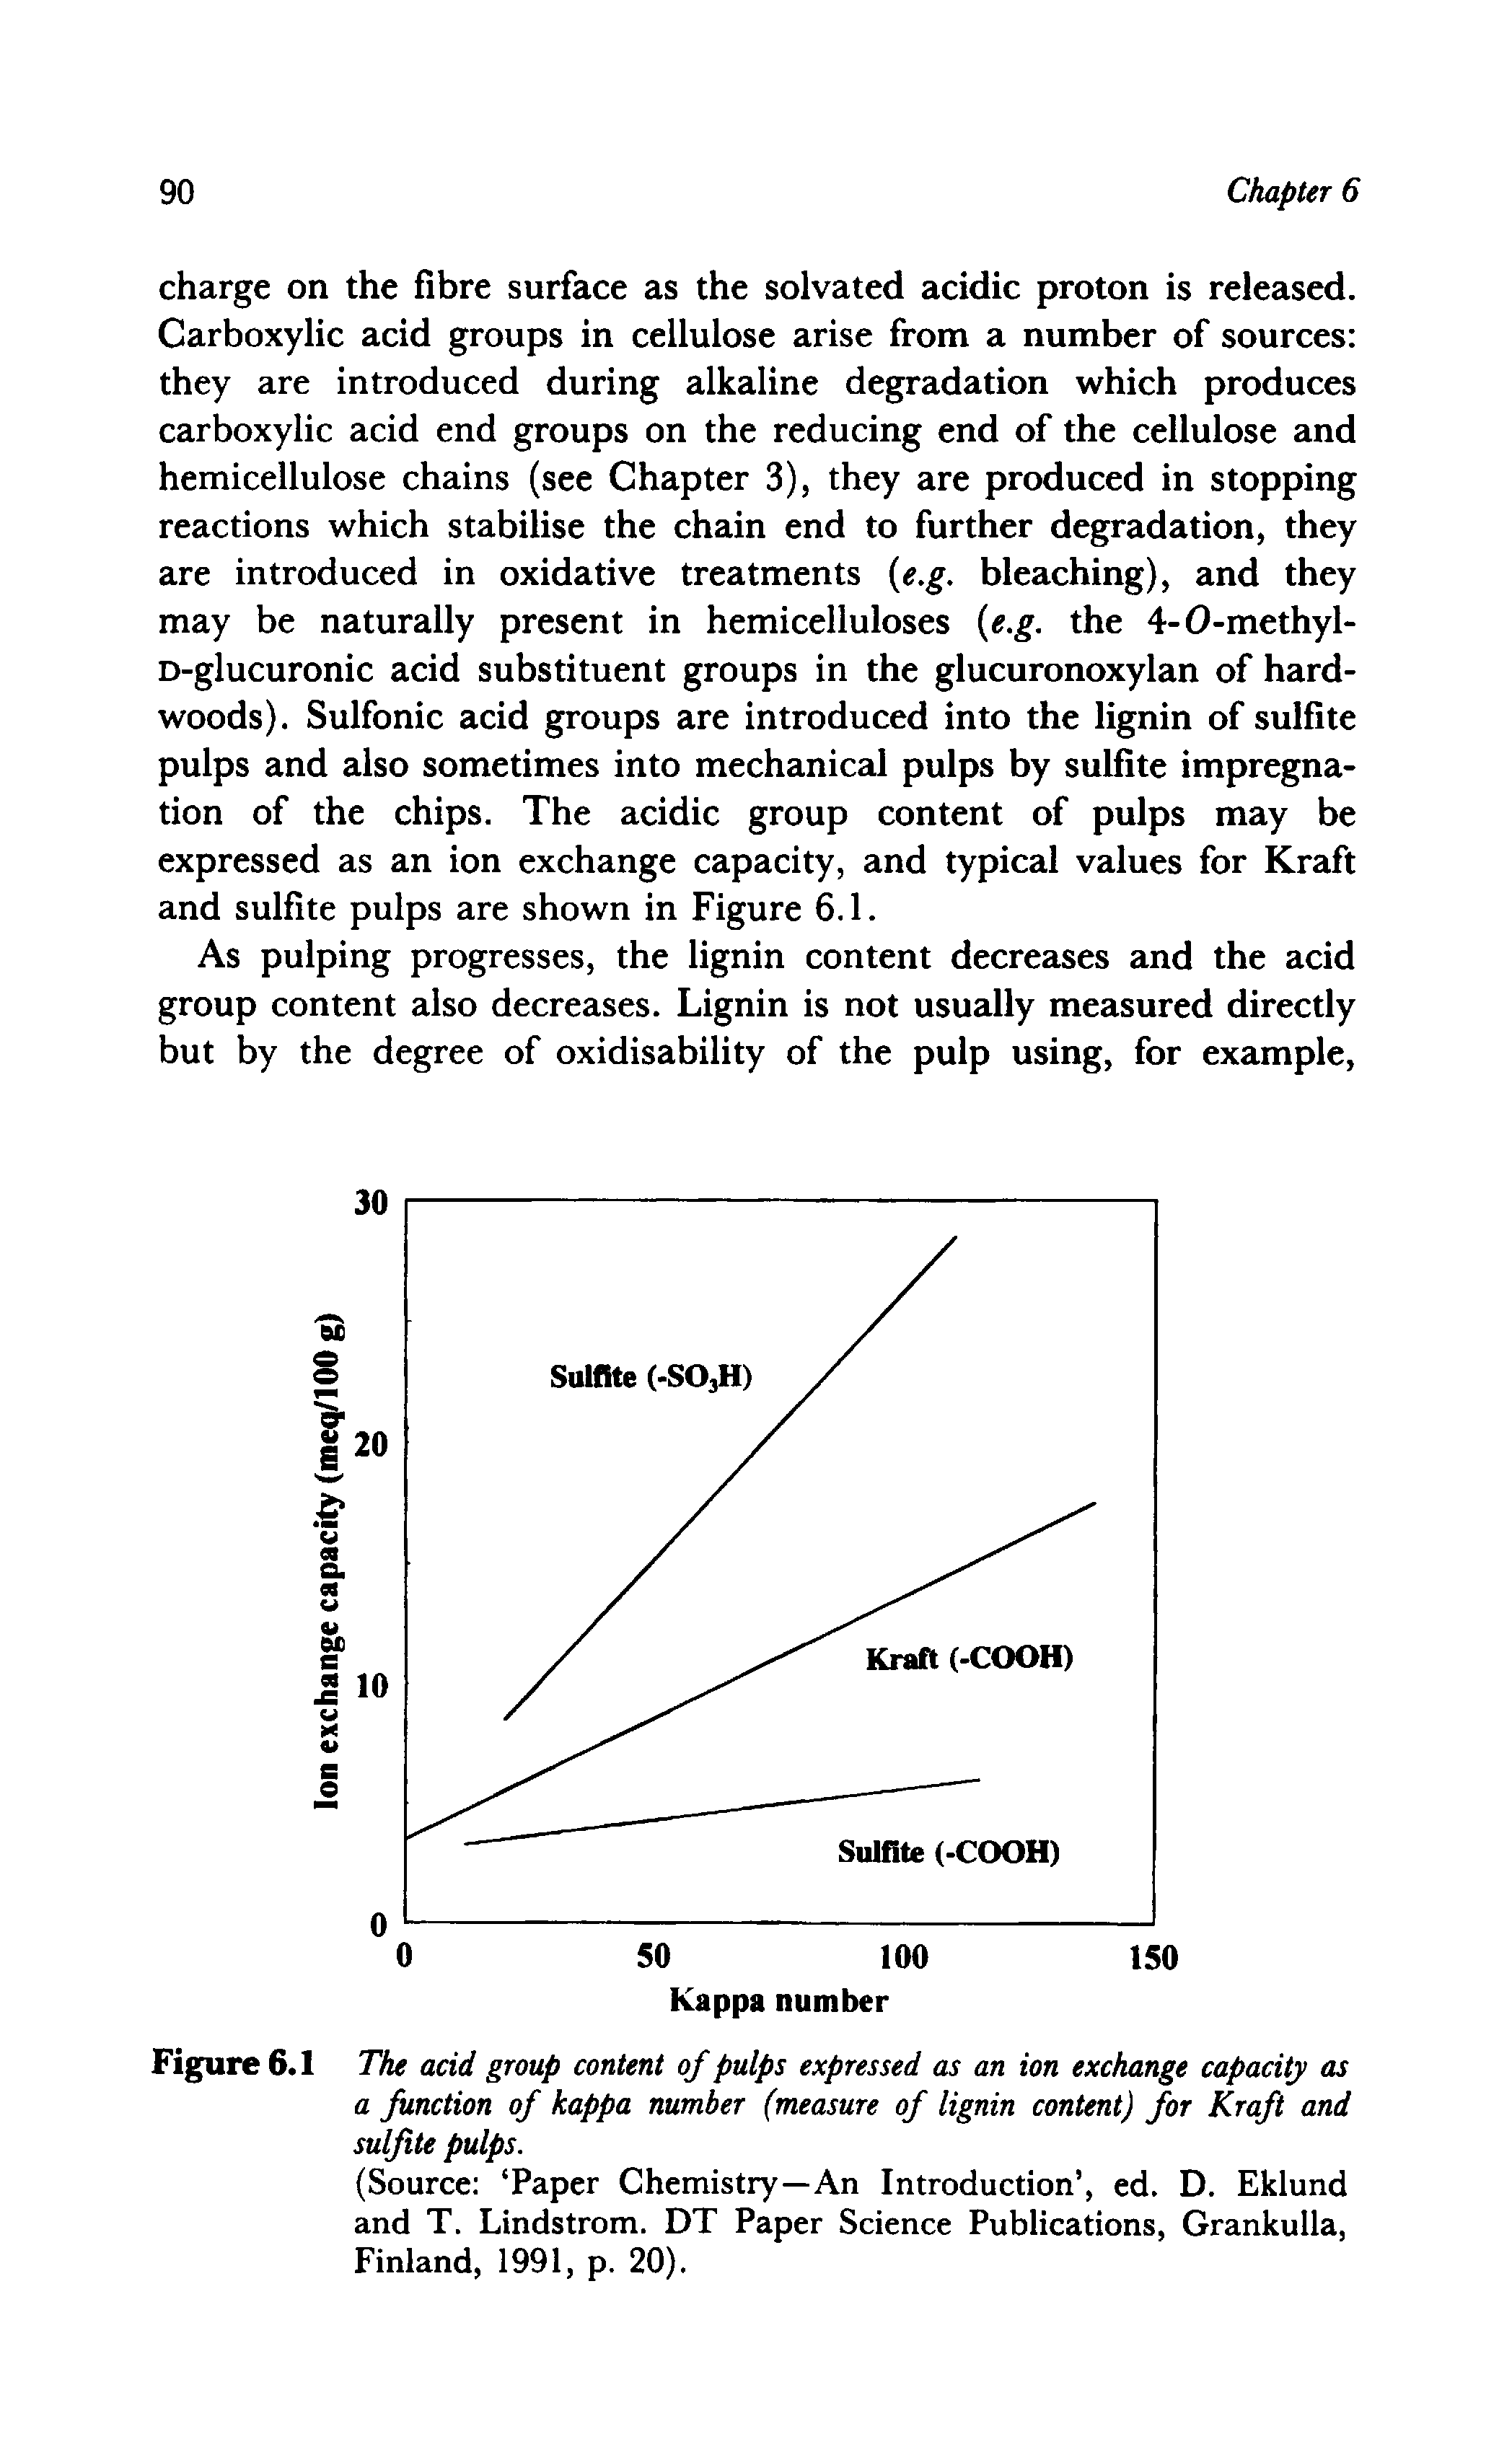 Figure 6.1 The acid group content of pulps expressed as an ion exchange capacity as a function of kappa number (measure of lignin content) for Kraft and sulfite pulps.